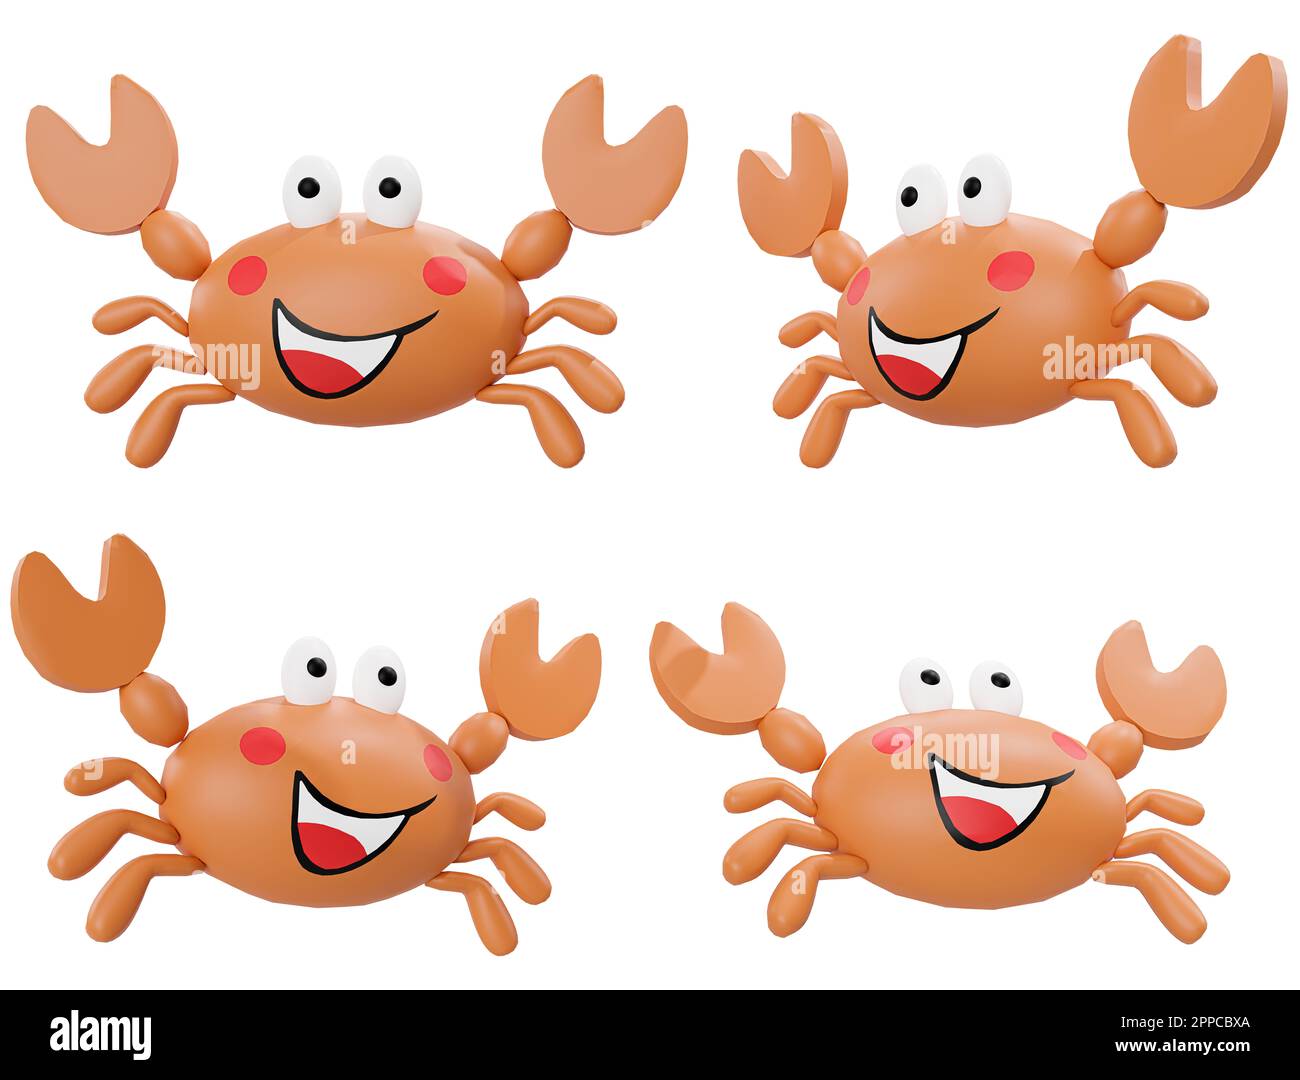 Cartoon Crab different angles isolated on white background high quality details - 3d rendering Stock Photo